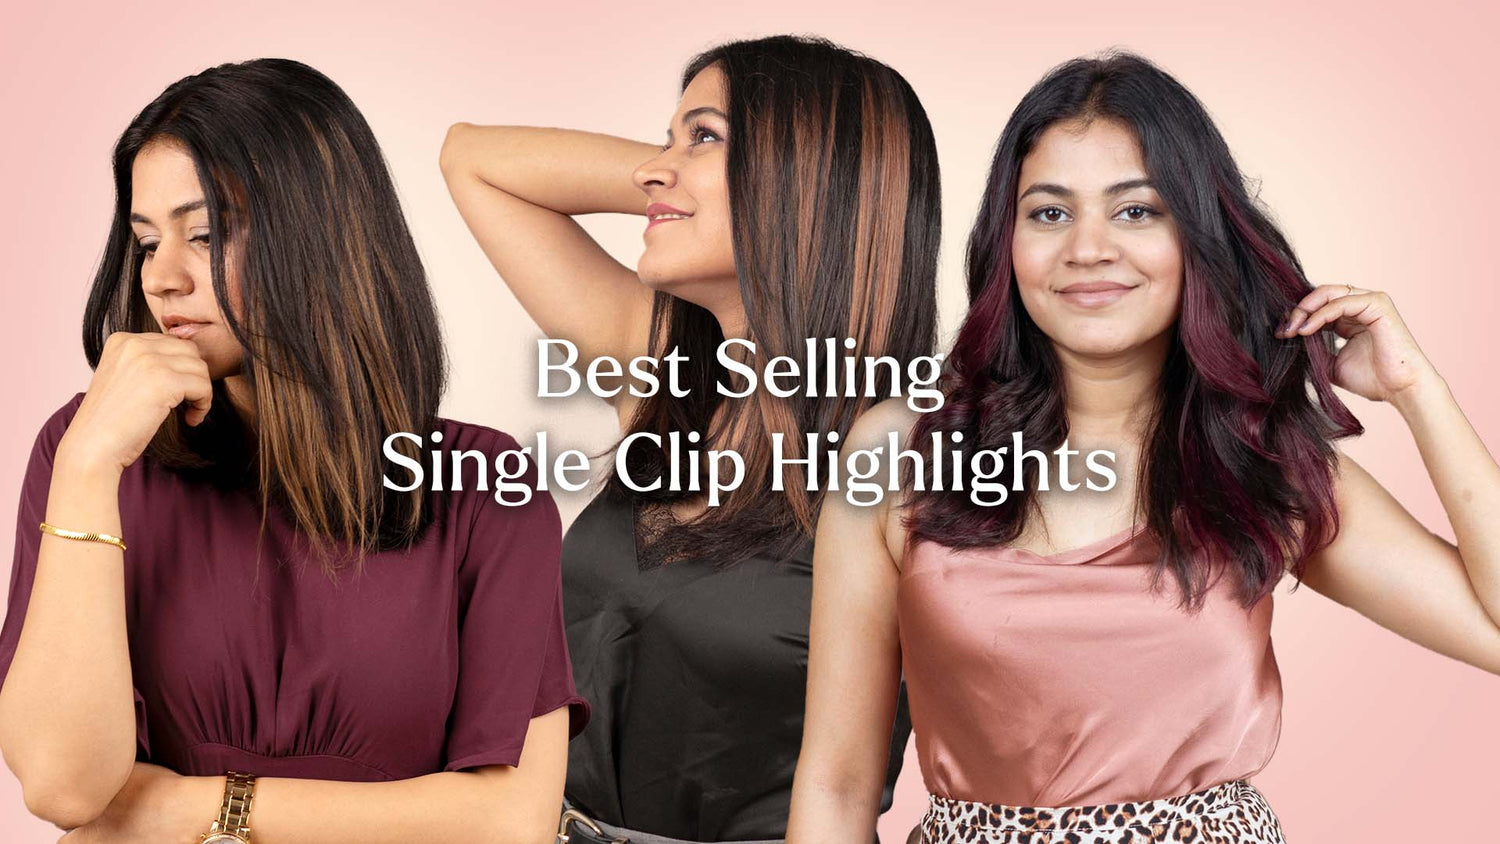 Talking about our top 5 best selling Single Clip Highlights